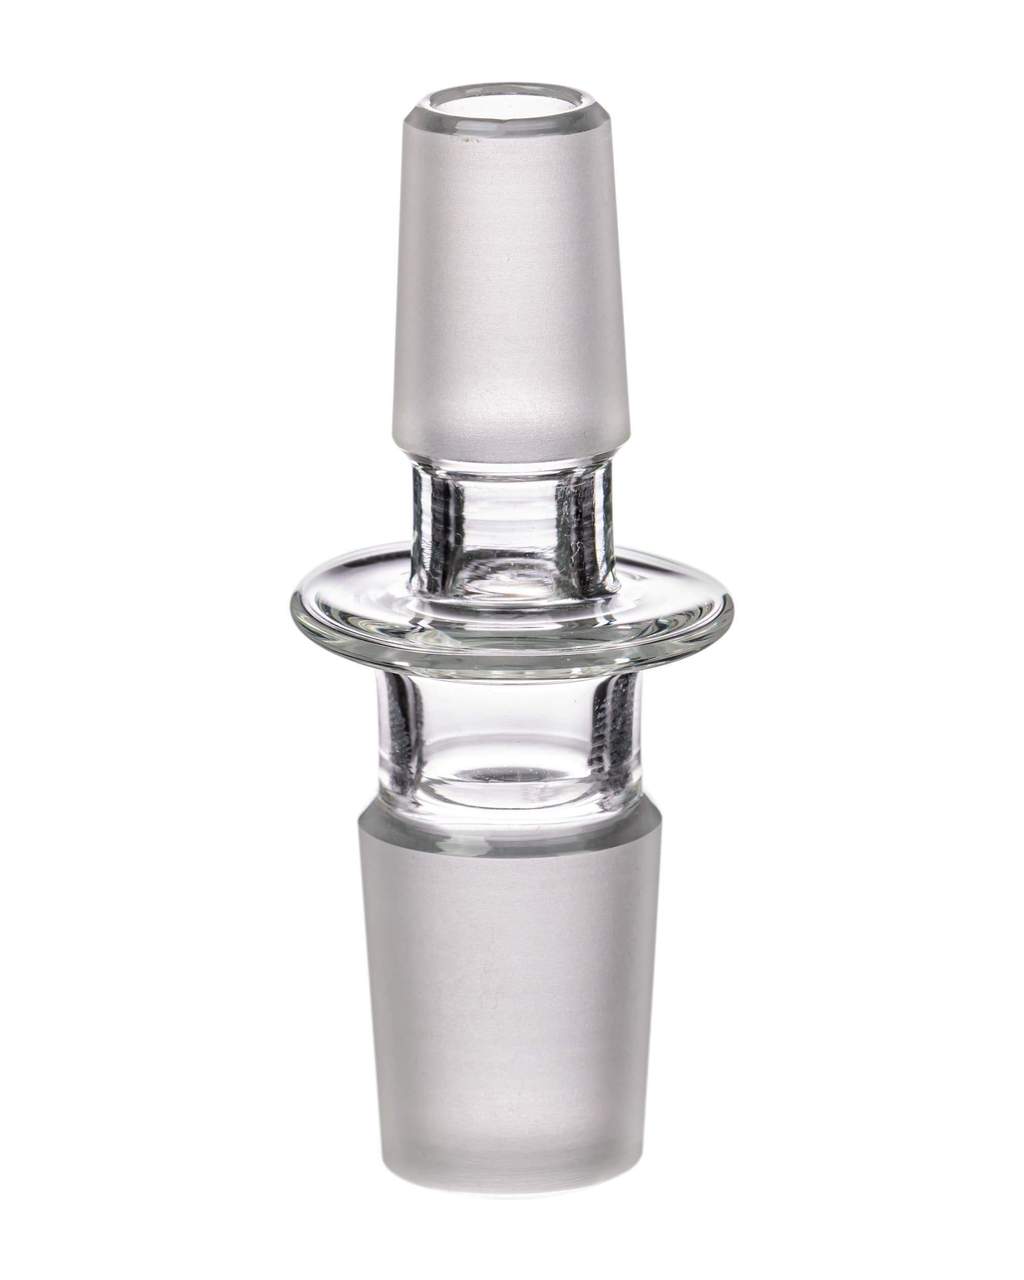 Glass Adapter GRAV - Male to Male Joint Adapter